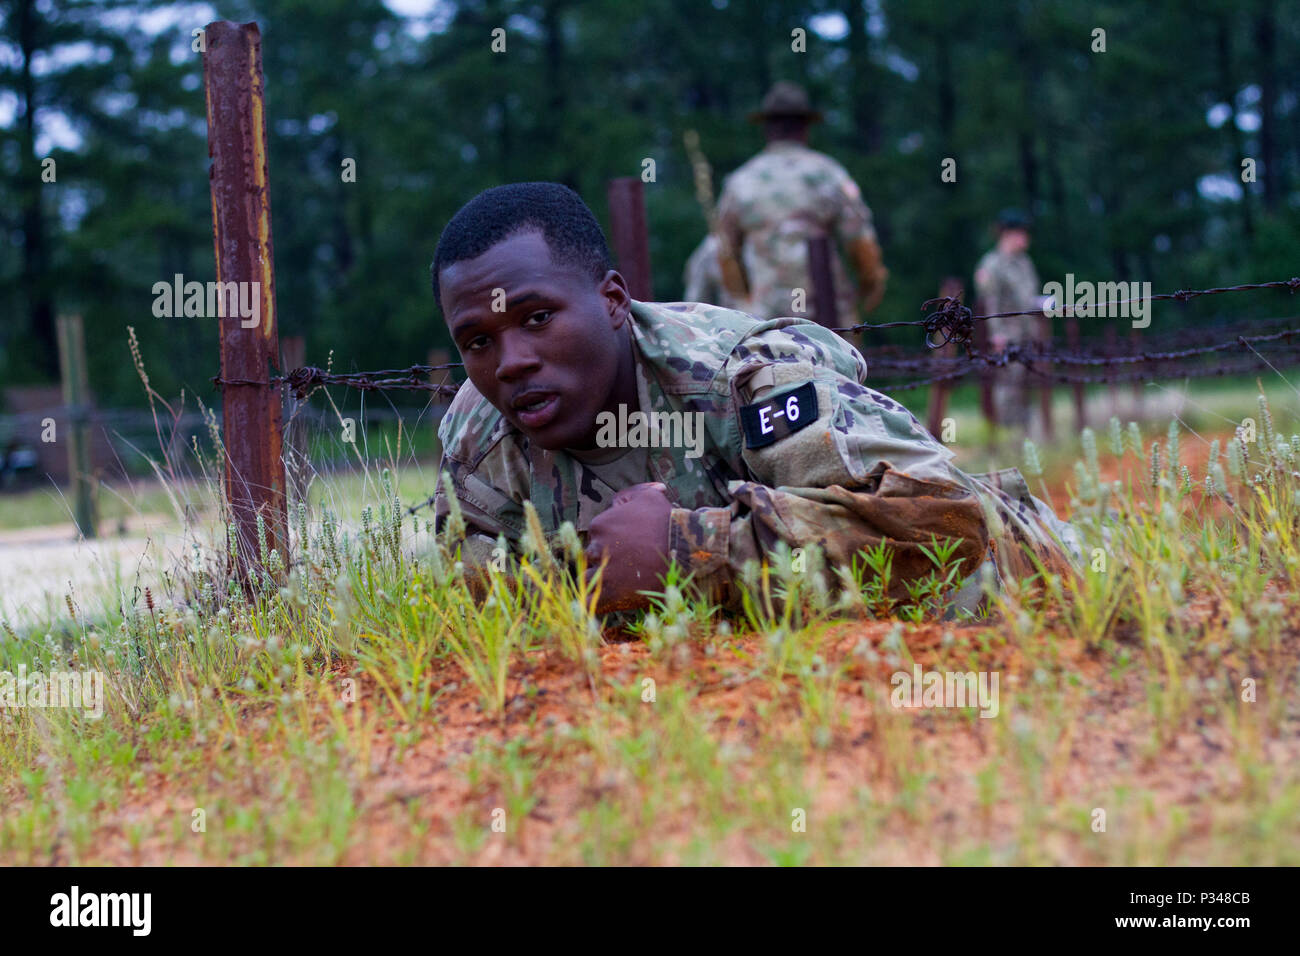 U.S. Army Reserve Pfc. Ladarius Smith, a human resources specialist from Lapine, Alabama, with the Headquarters, Gulf Division, 84th Training Command (Unit Readiness), performs a low crawl on obstacle four of the Fort Bragg Air Assault School Obstacle Course. Touching the barbed wire with any part of their body during this lane results in disqualification, requiring the competitor to be returned to the beginning of the lane to try again or continue with a loss of points.  Thirty-six warriors continue to vie for the title of United States Army Reserve Best Warrior during the grueling multifacet Stock Photo